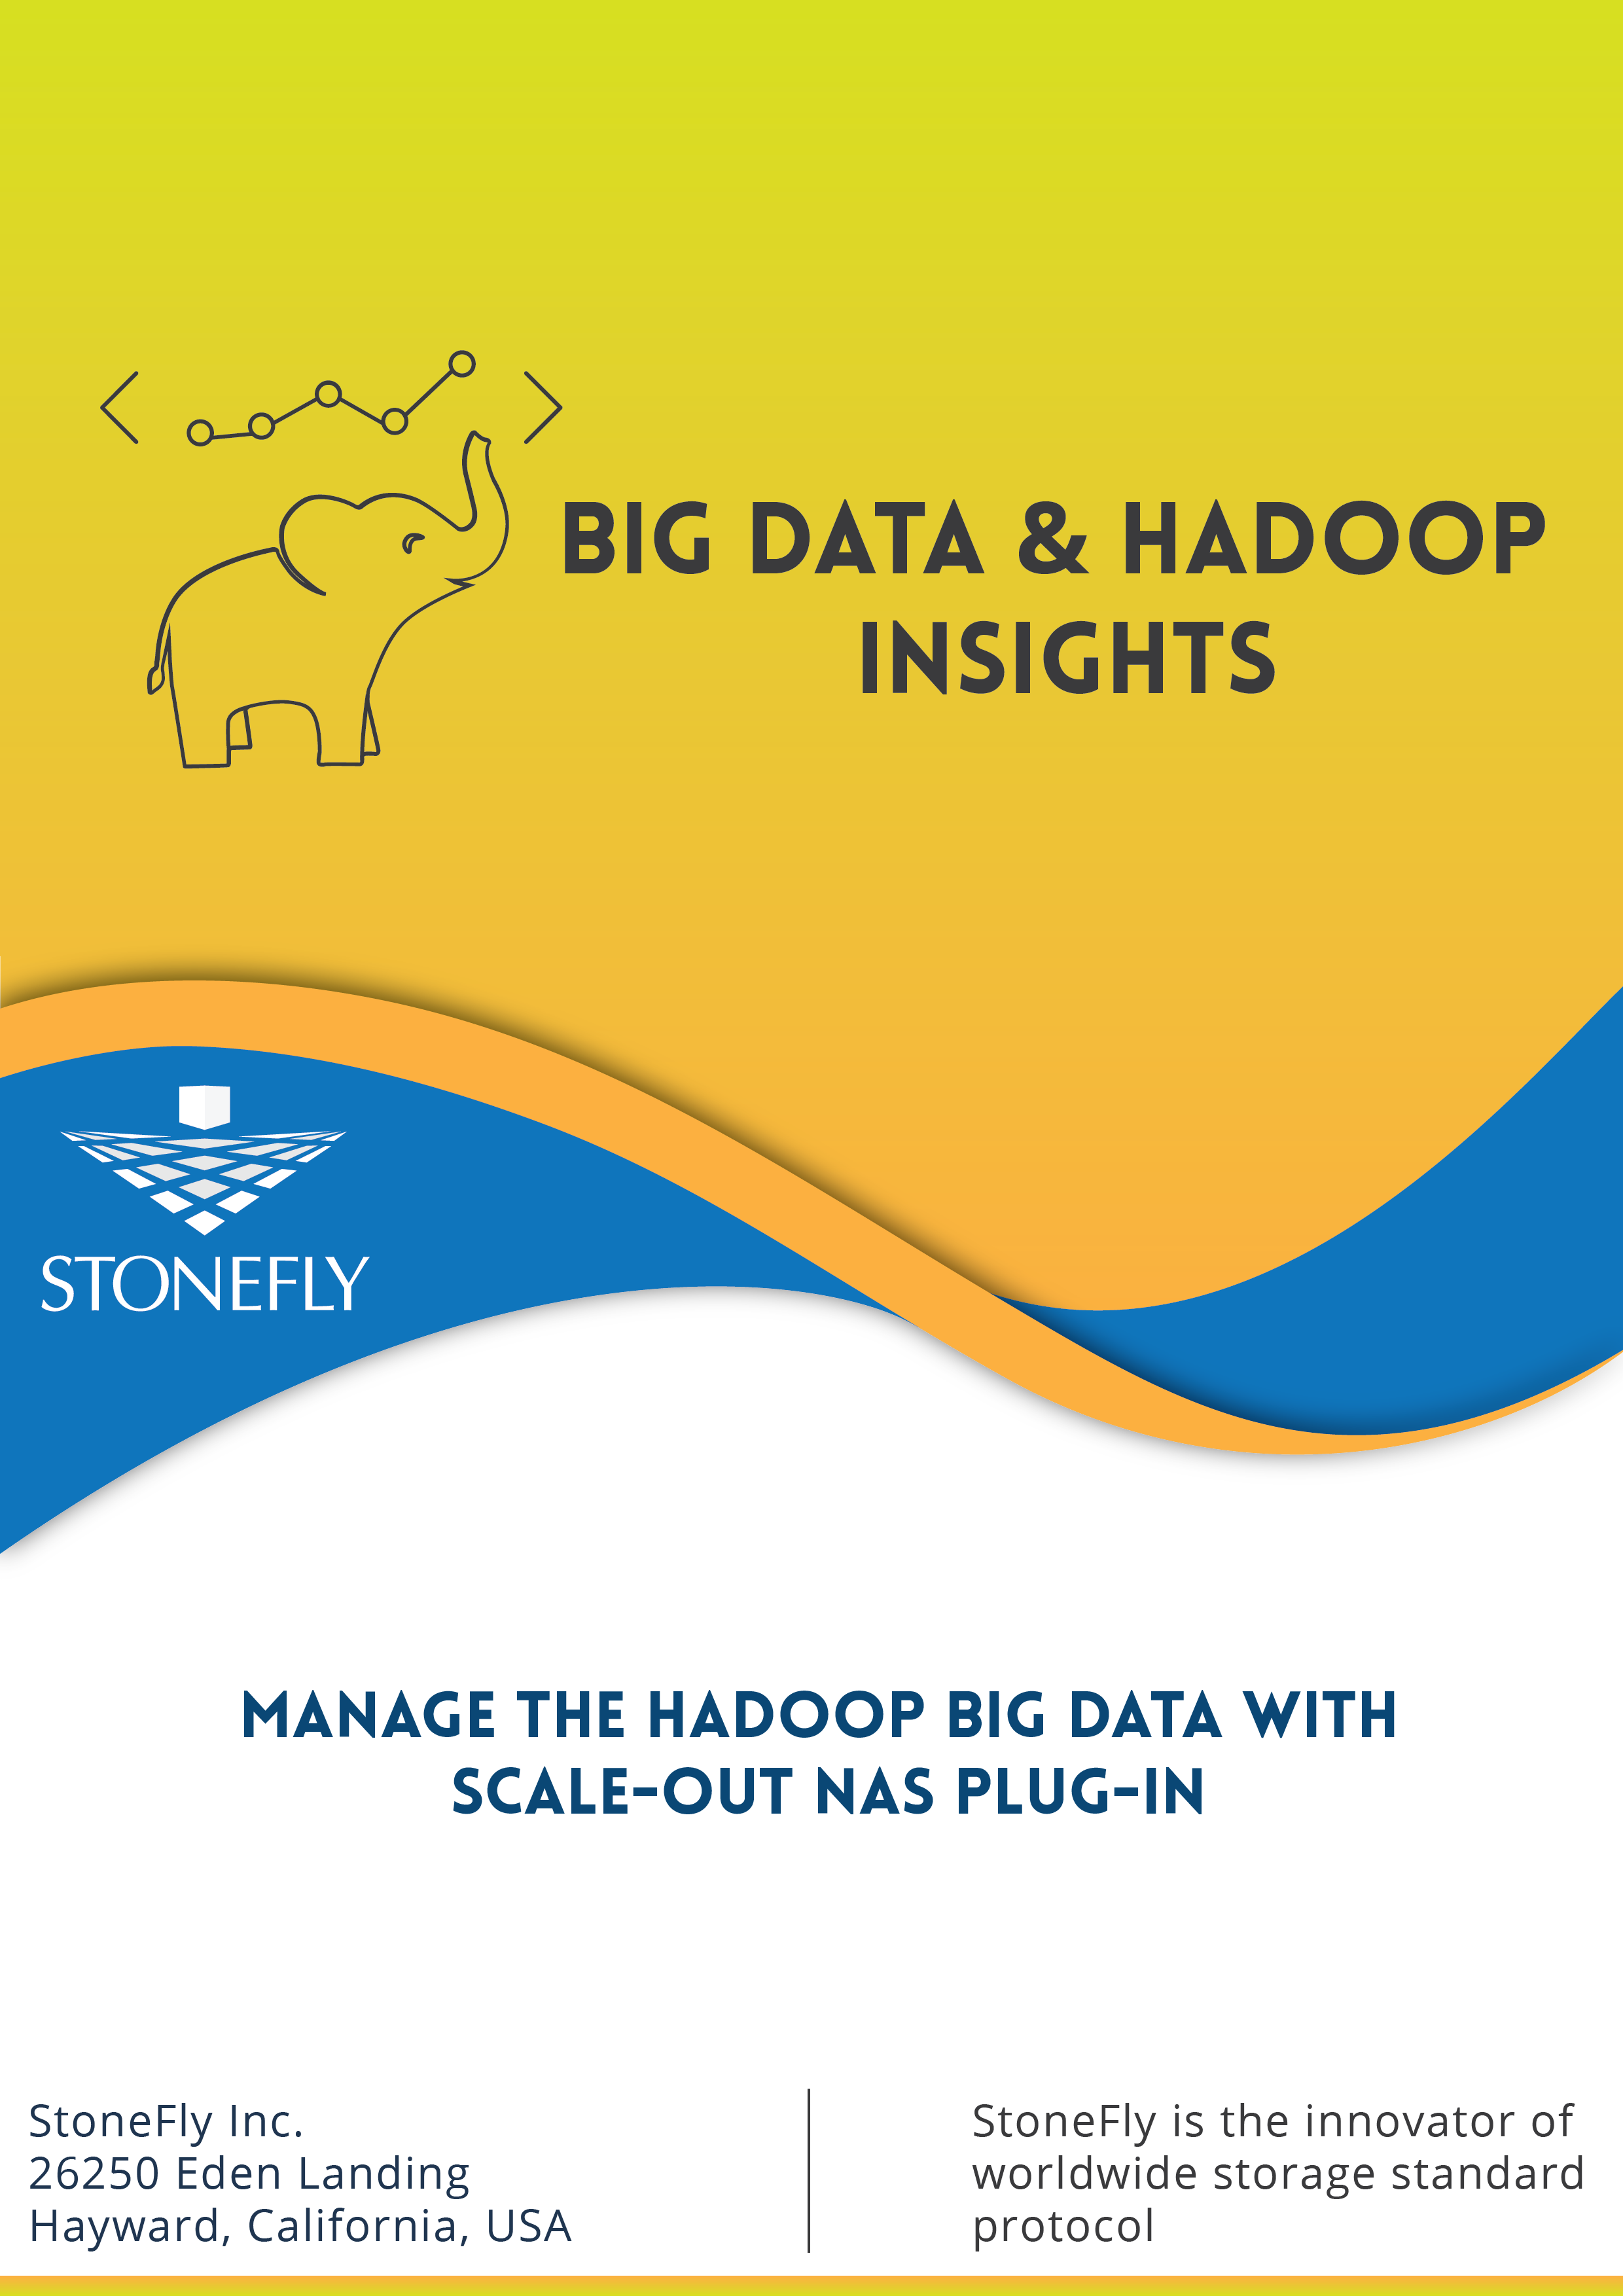 Big Data & Hadoop Insights: Manage the Hadoop Big Data with Scale-Out NAS plug-in